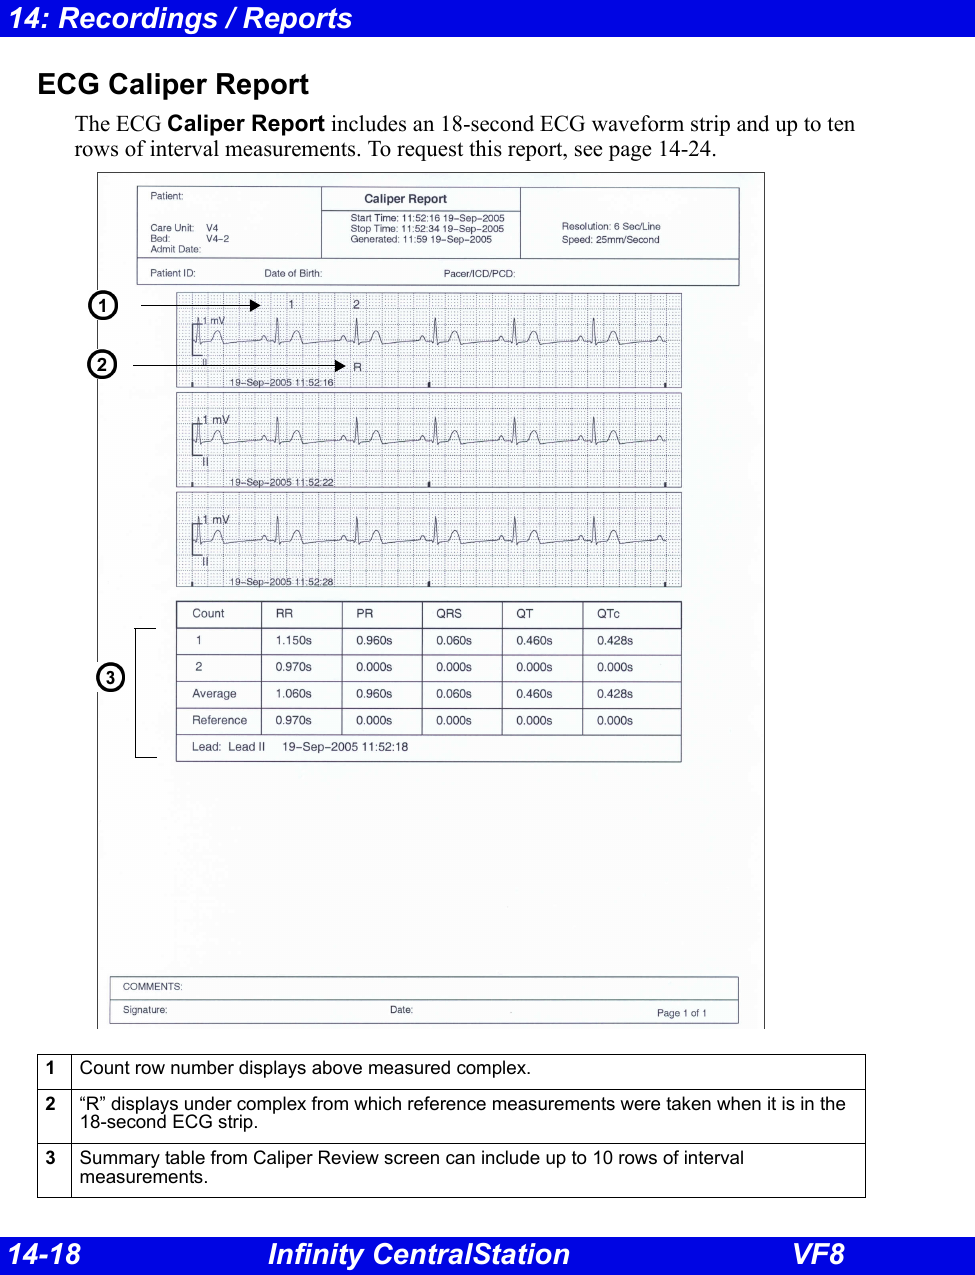 14-18 Infinity CentralStation VF814: Recordings / ReportsECG Caliper ReportThe ECG Caliper Report includes an 18-second ECG waveform strip and up to ten rows of interval measurements. To request this report, see page 14-24.1Count row number displays above measured complex.2“R” displays under complex from which reference measurements were taken when it is in the 18-second ECG strip.3Summary table from Caliper Review screen can include up to 10 rows of interval measurements.